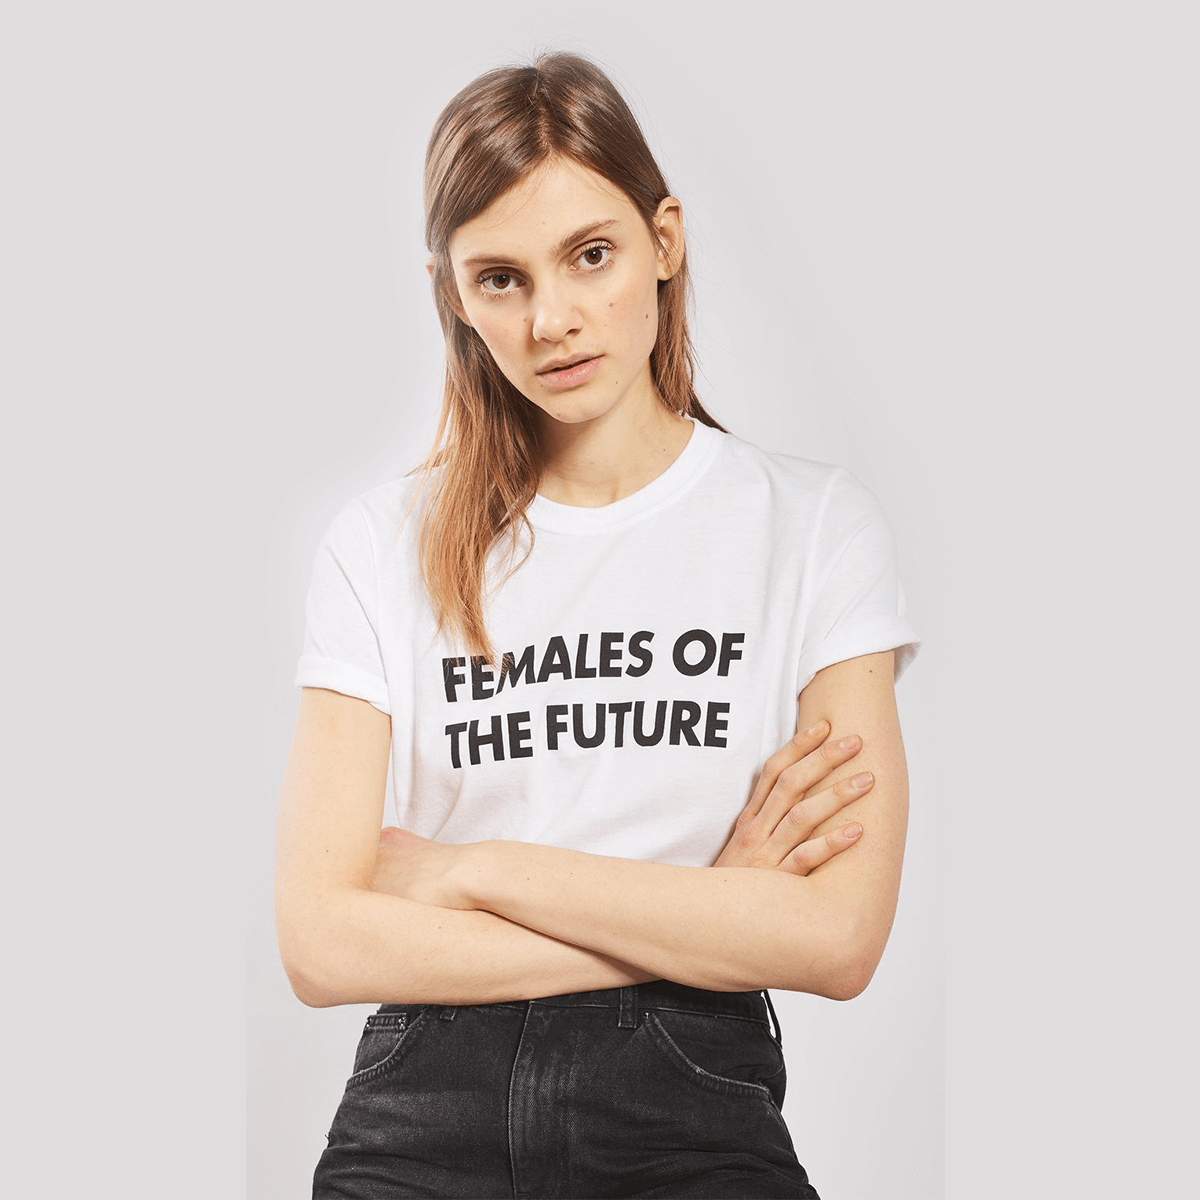 Females of the Future T-shirt